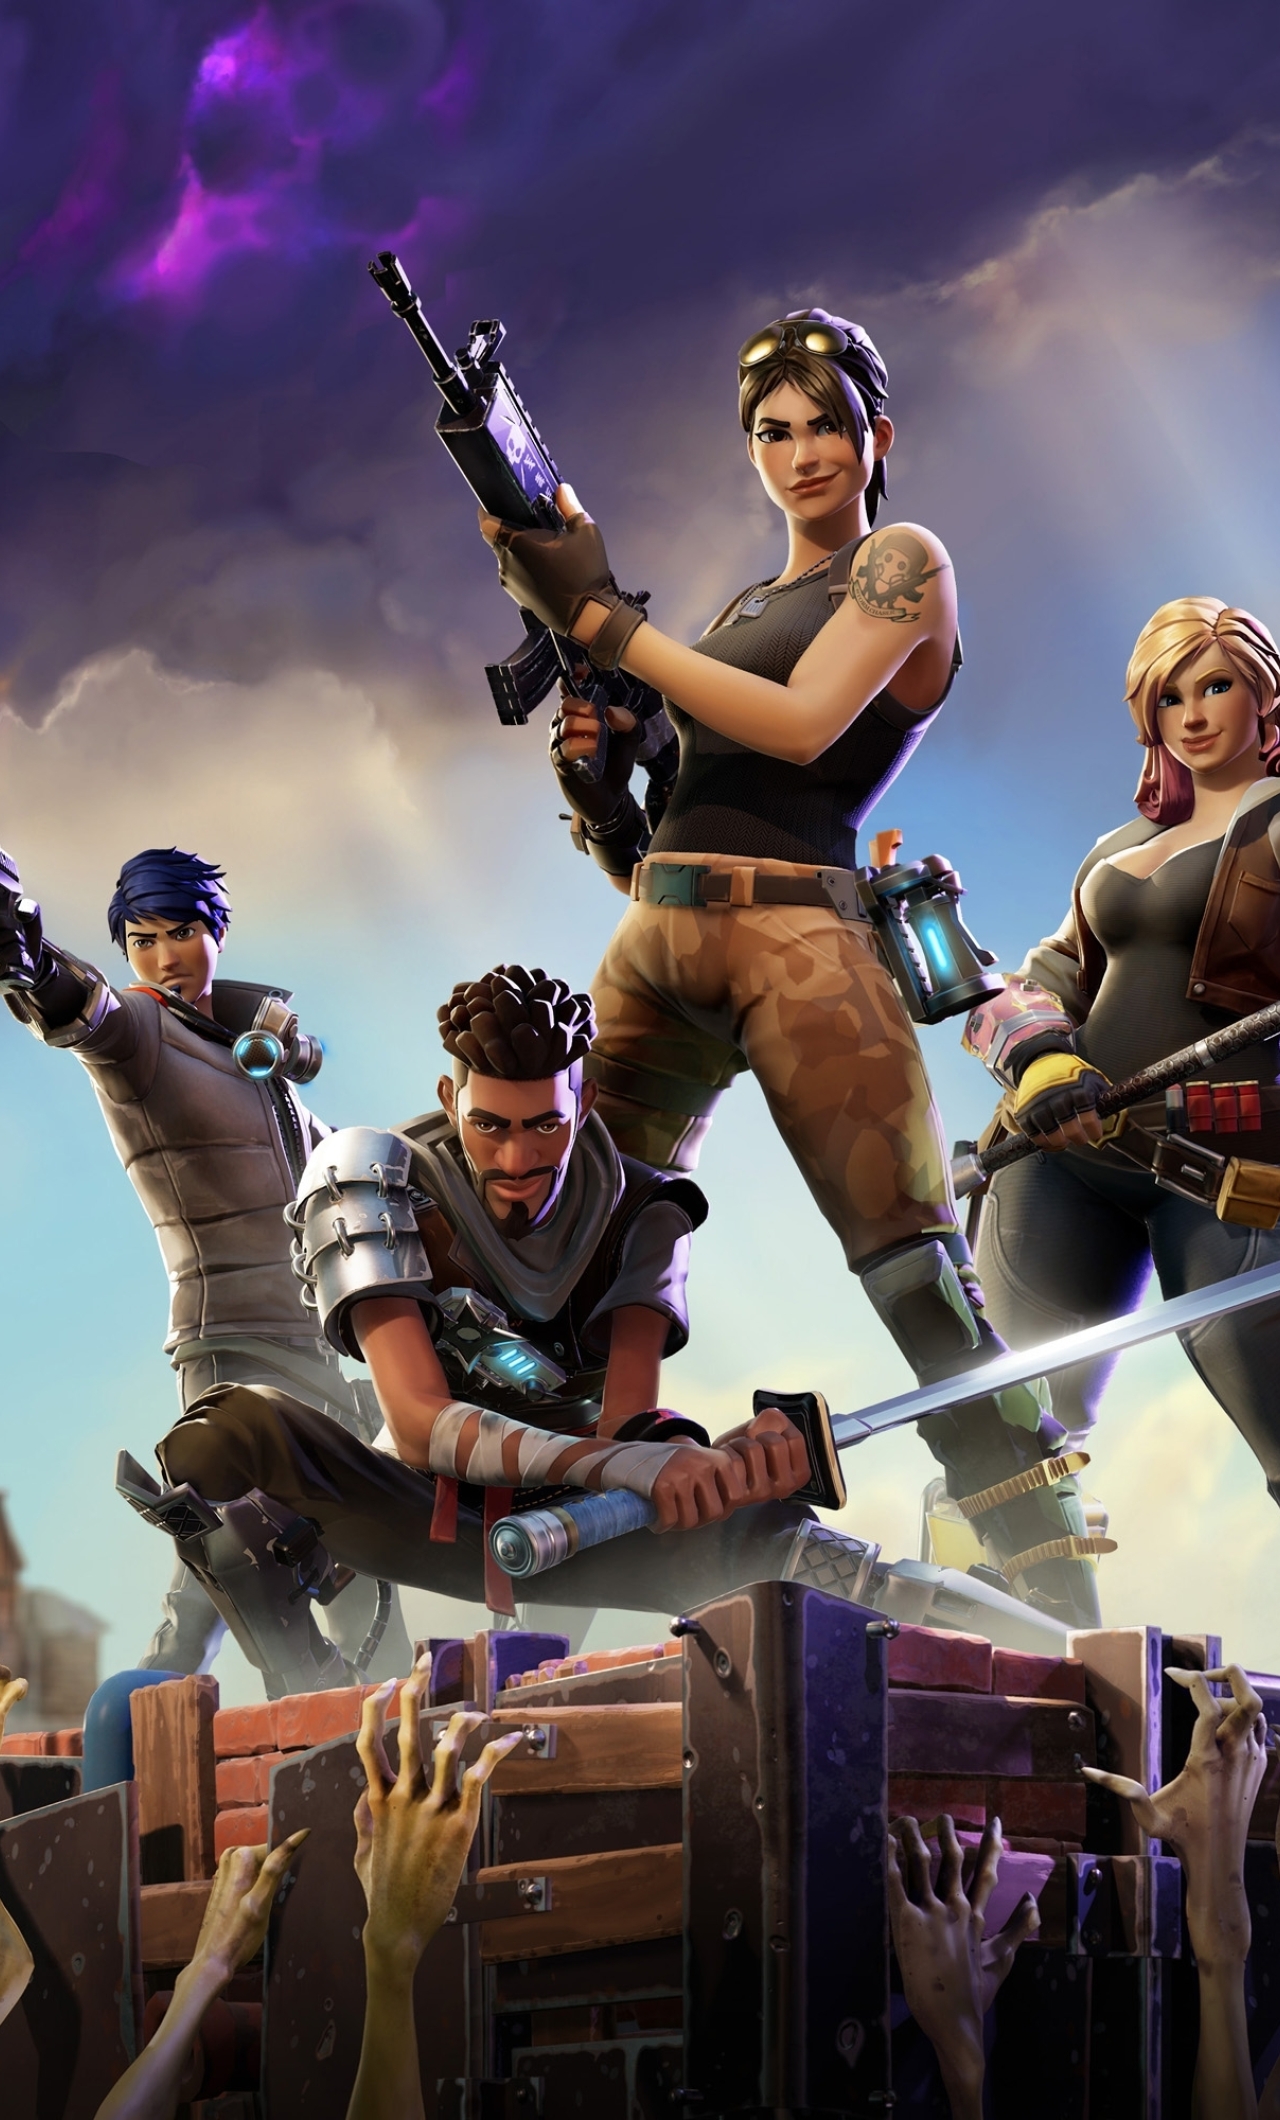 Download Fortnite Game Poster 800x600 Resolution, Full HD ...